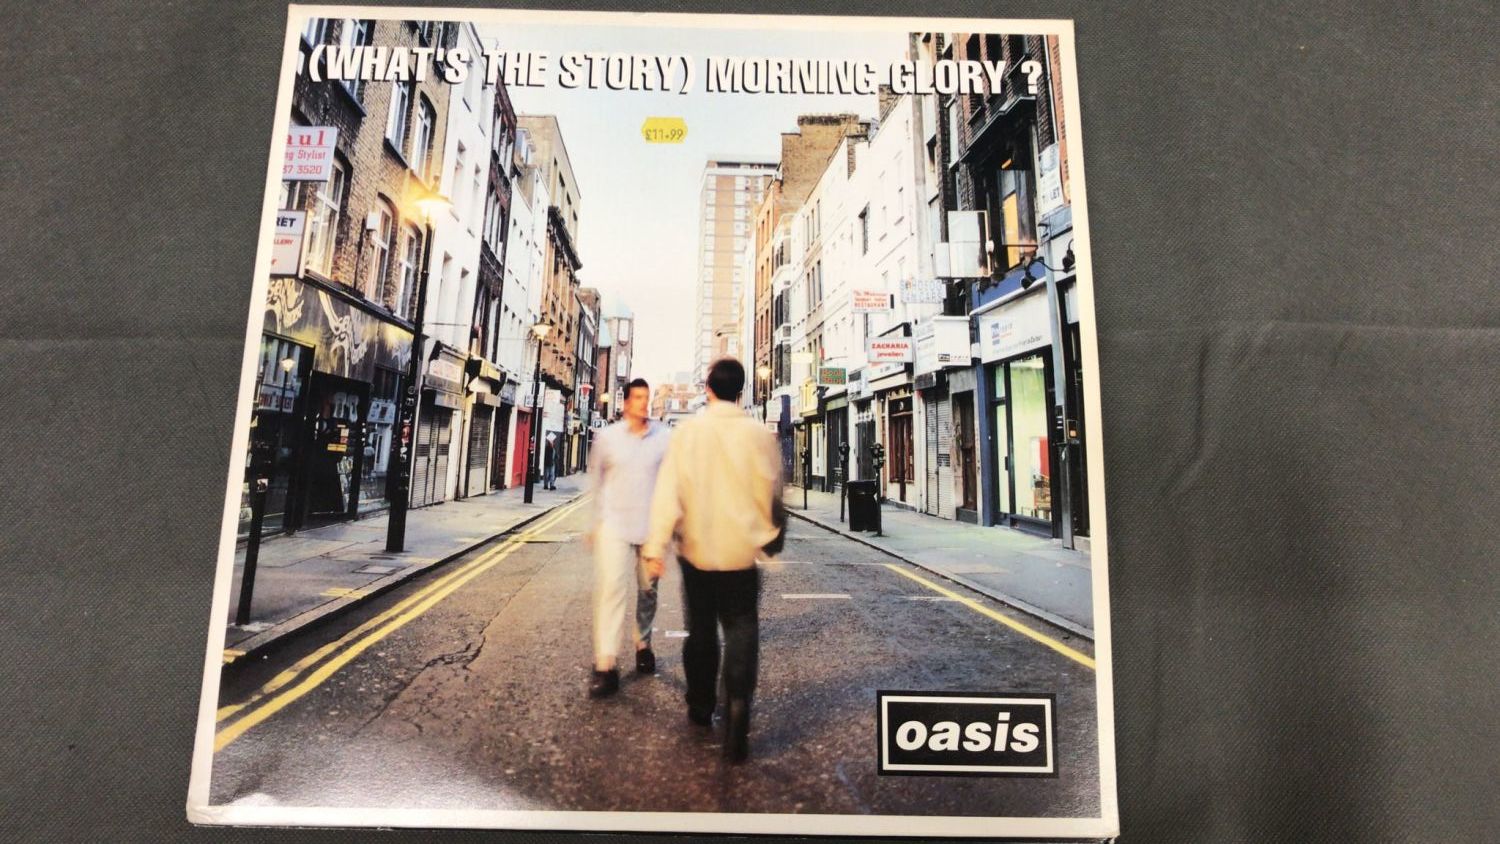 Oasis - What's the Story Morning Glory CRE_LP 189, October 1995 UK Visual Grading only, not play